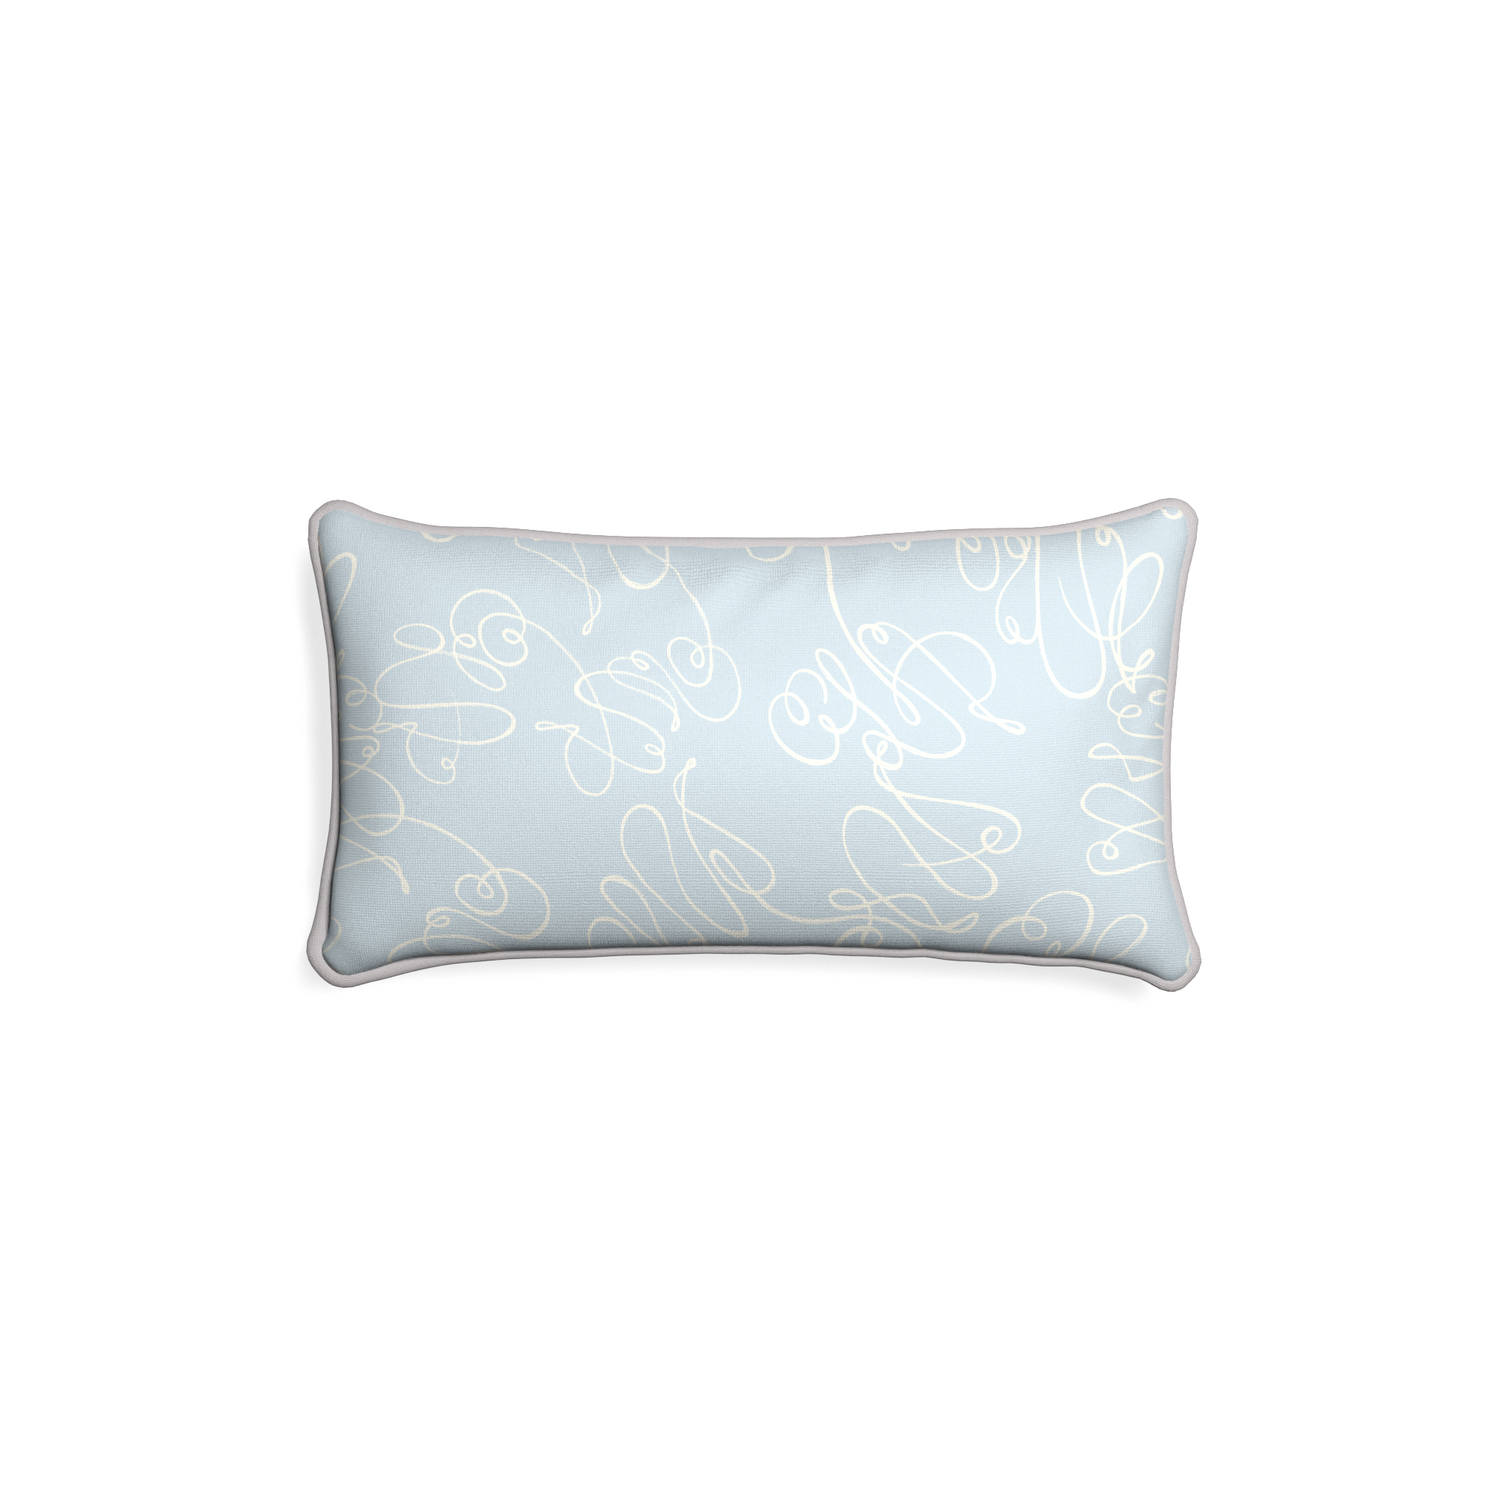 Petite-lumbar mirabella custom powder blue abstractpillow with pebble piping on white background